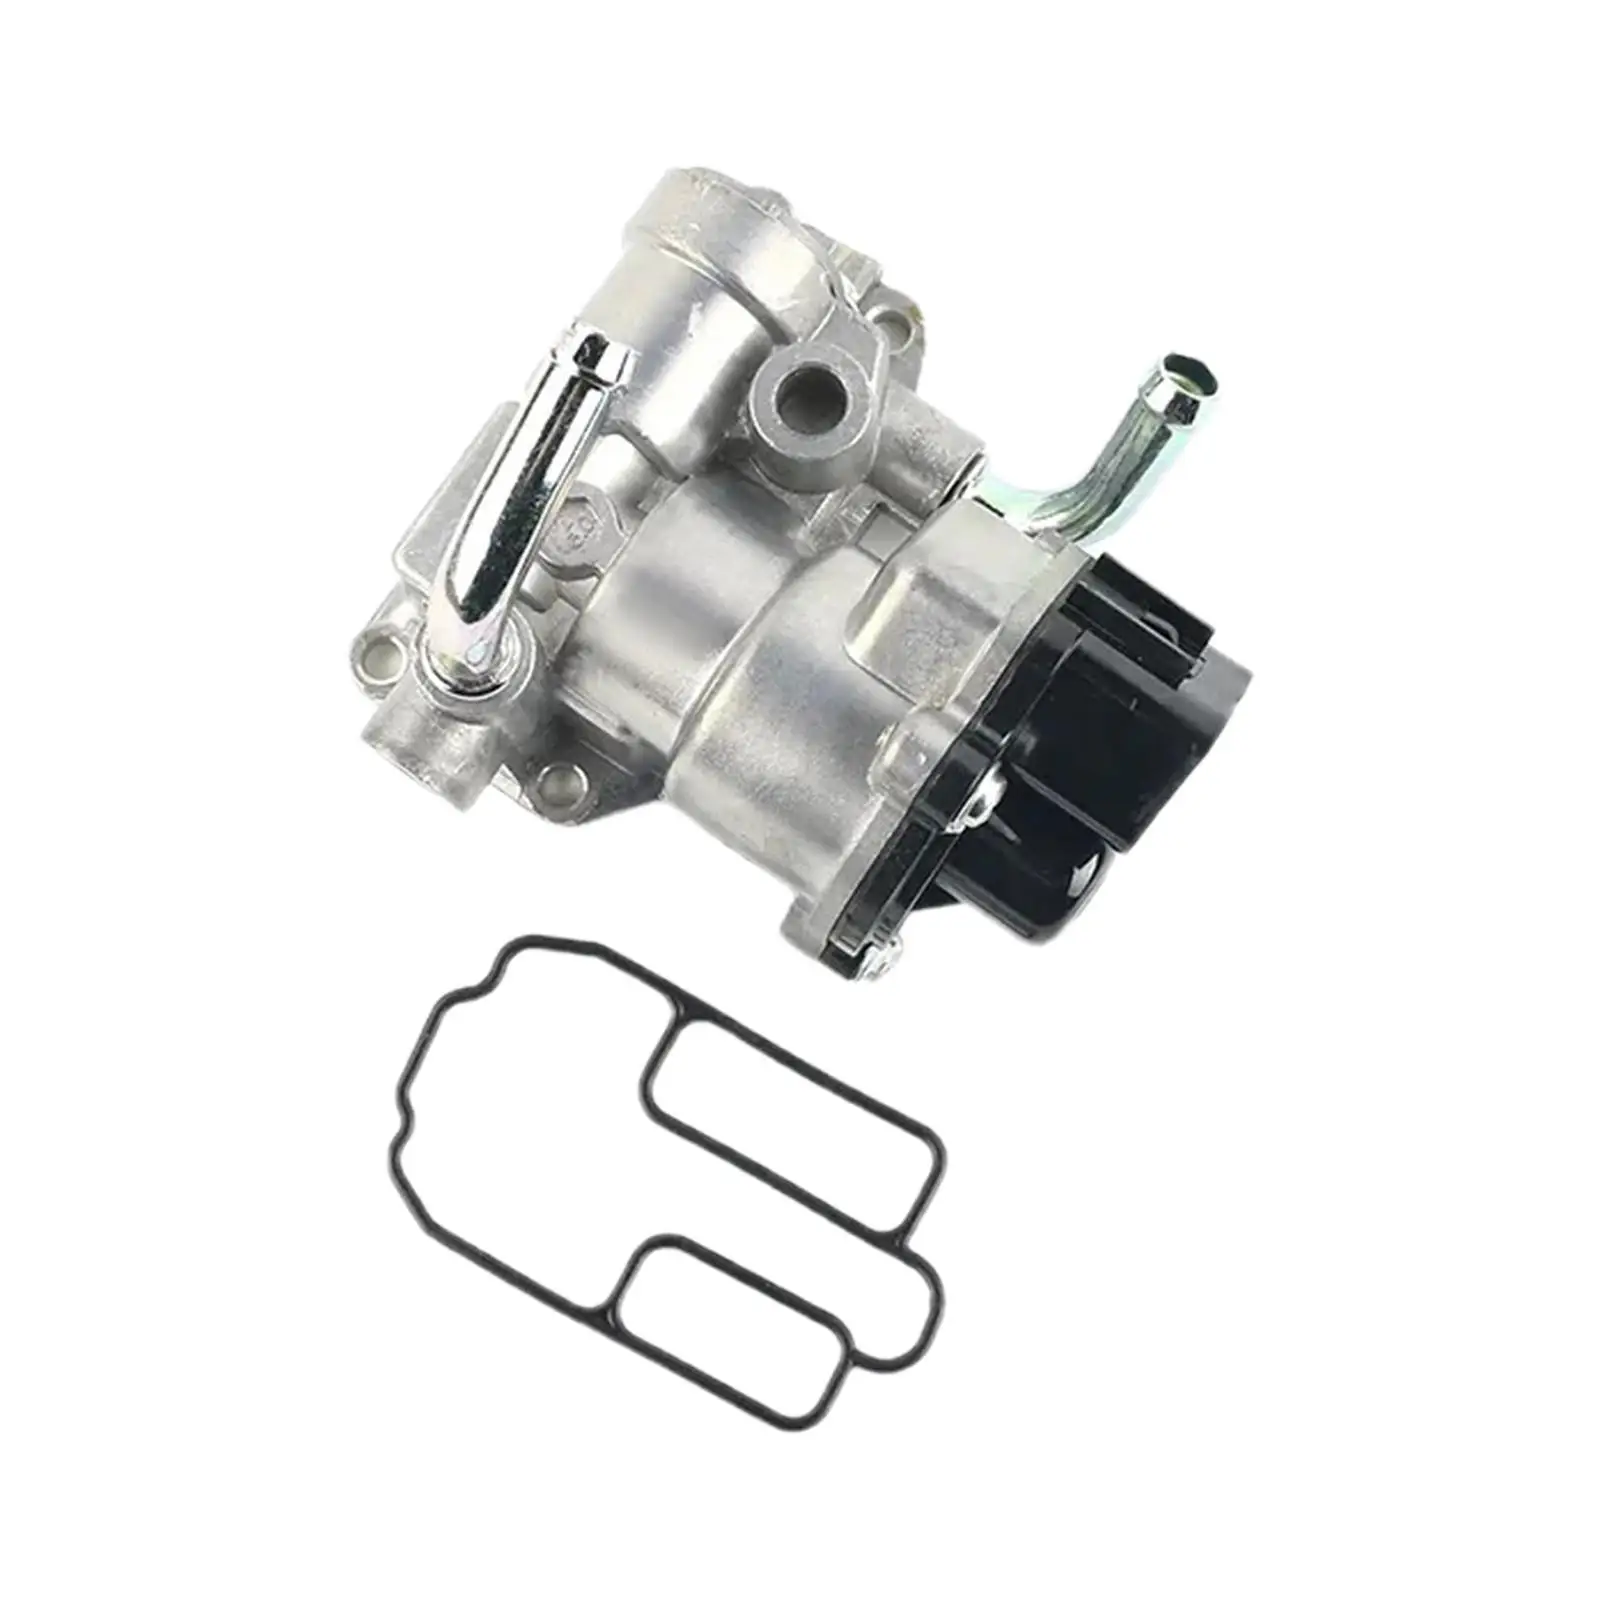 Idle Air Control Valve MD614921 for Mitsubishi EVO 4 5 6 Accessories Easy Installation Replaces Durable